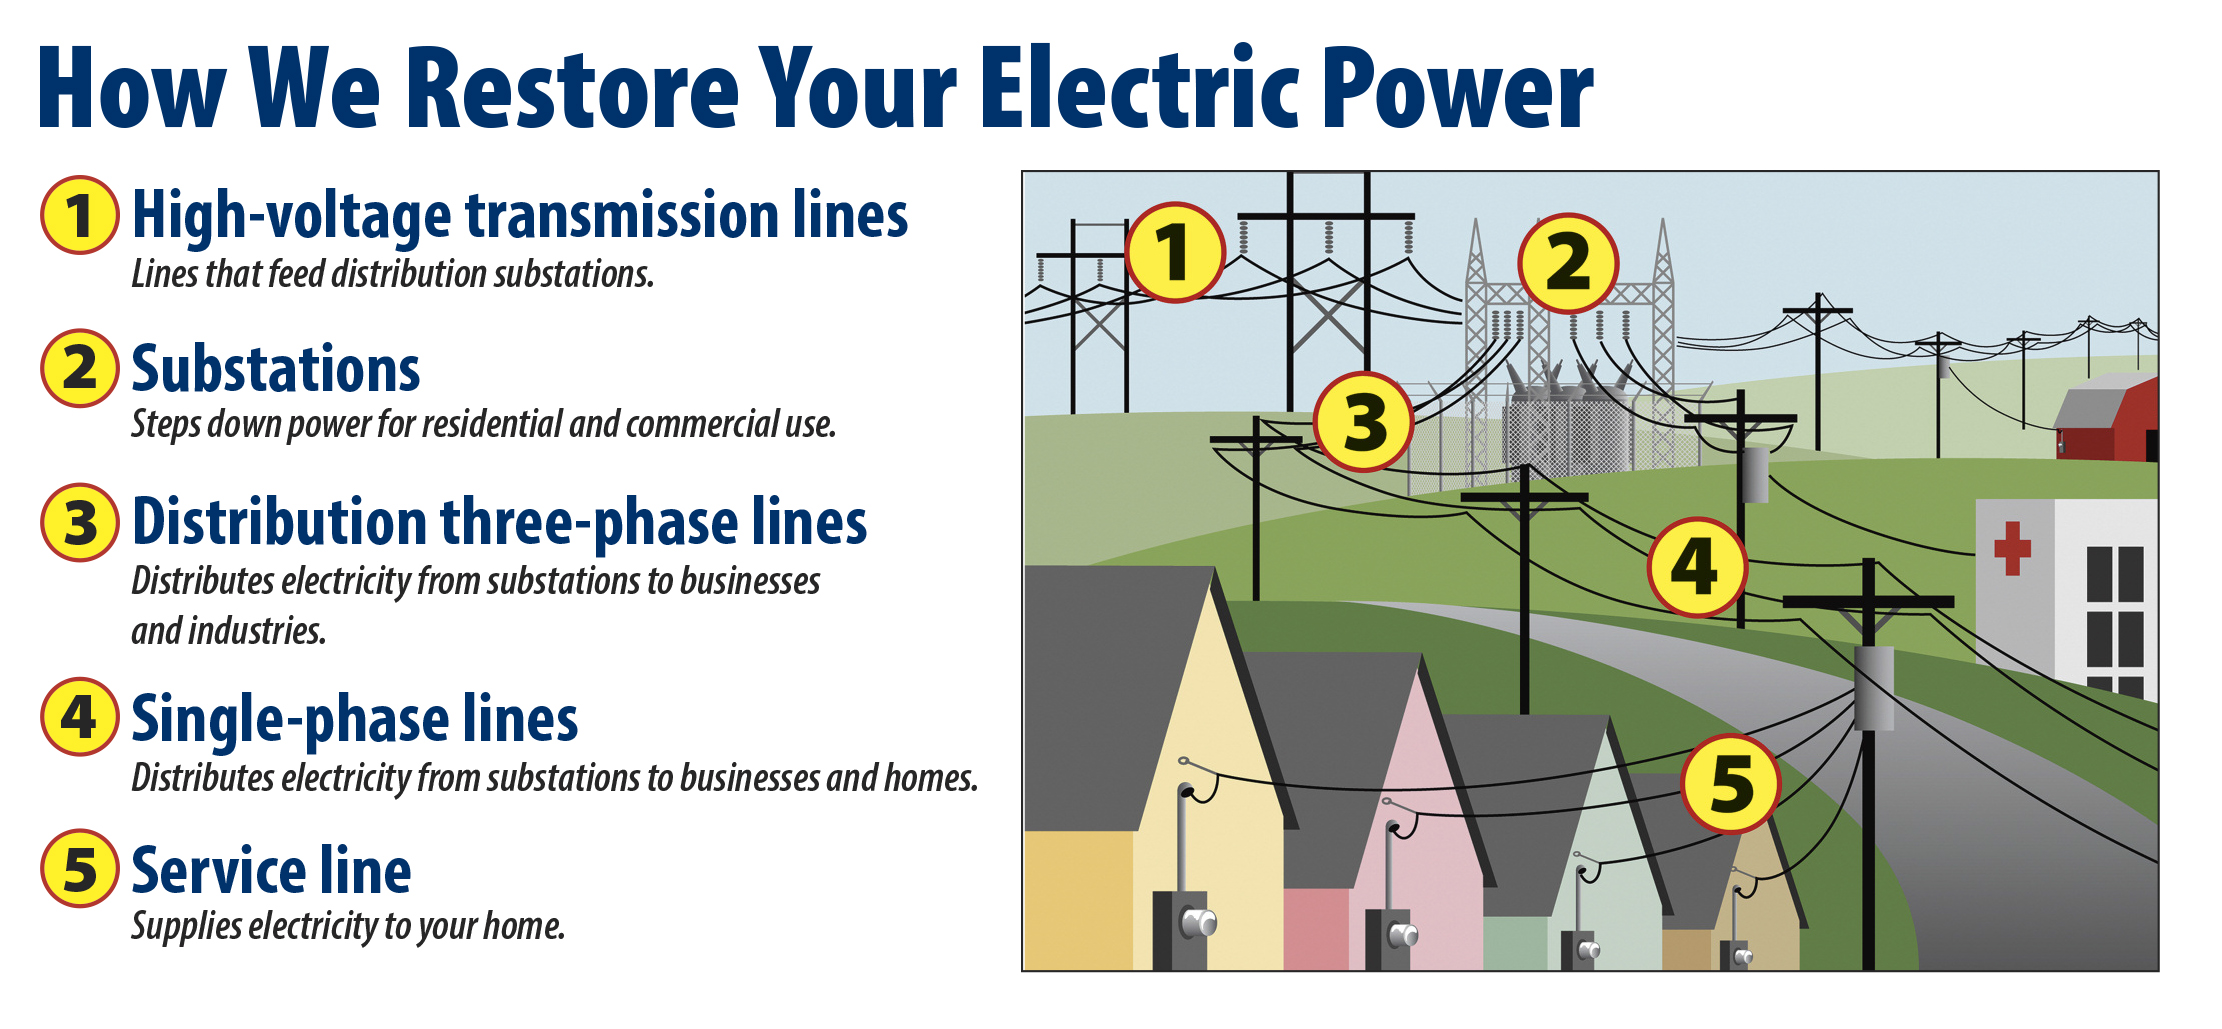 How We Restore Your Electric Power